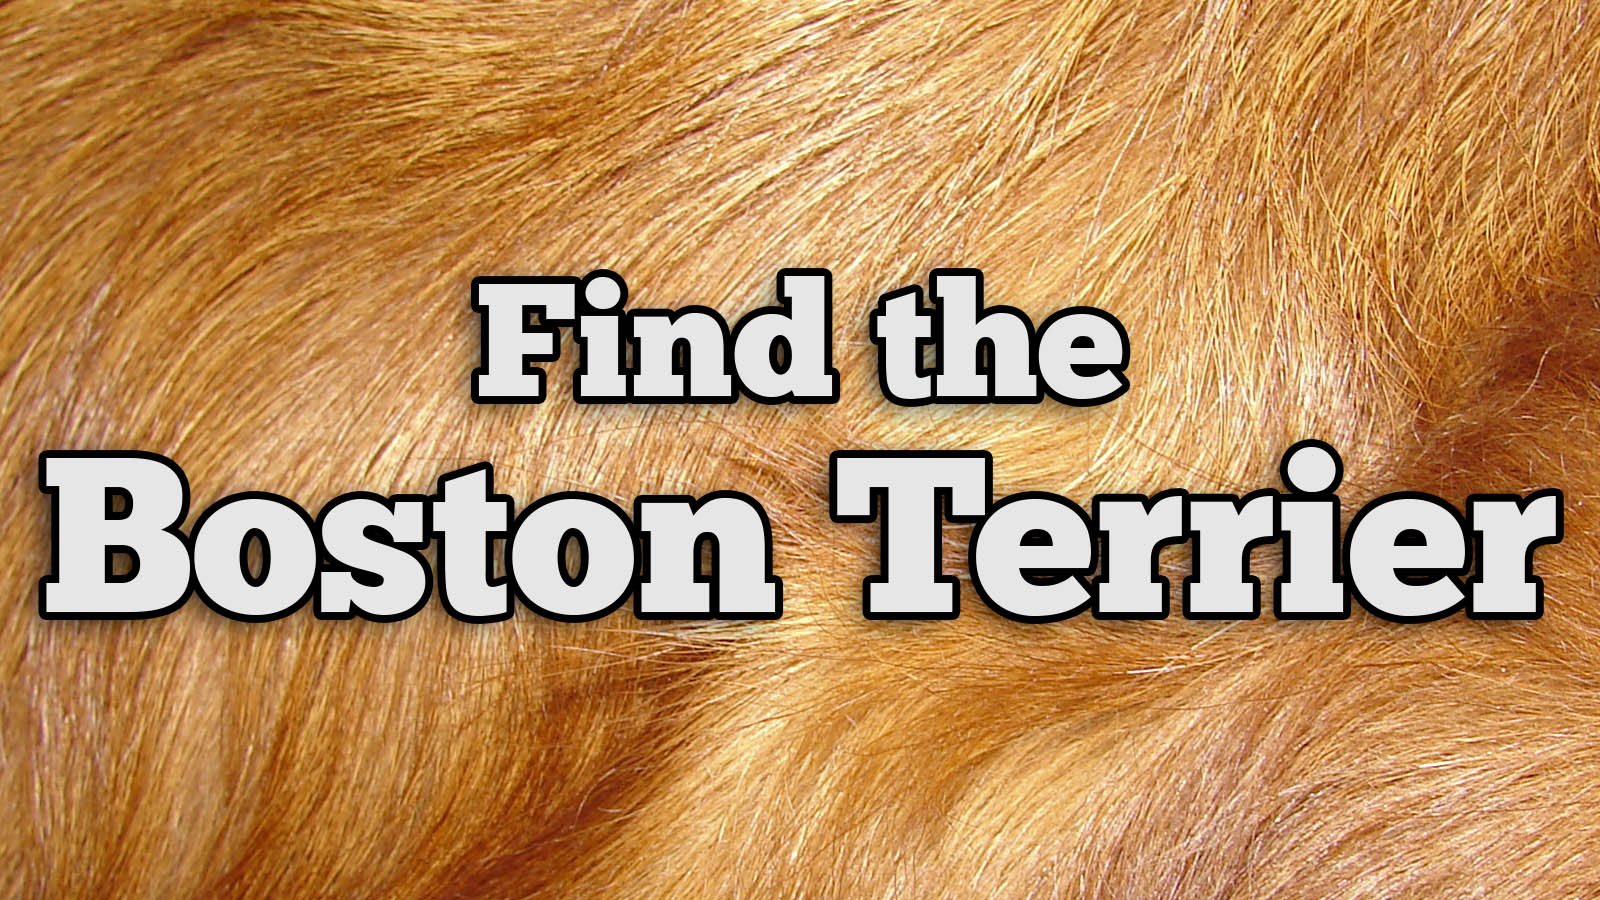 We Bet You Can’t Identify More Than 20/27 of These Dog Breeds Text Boston Terrier